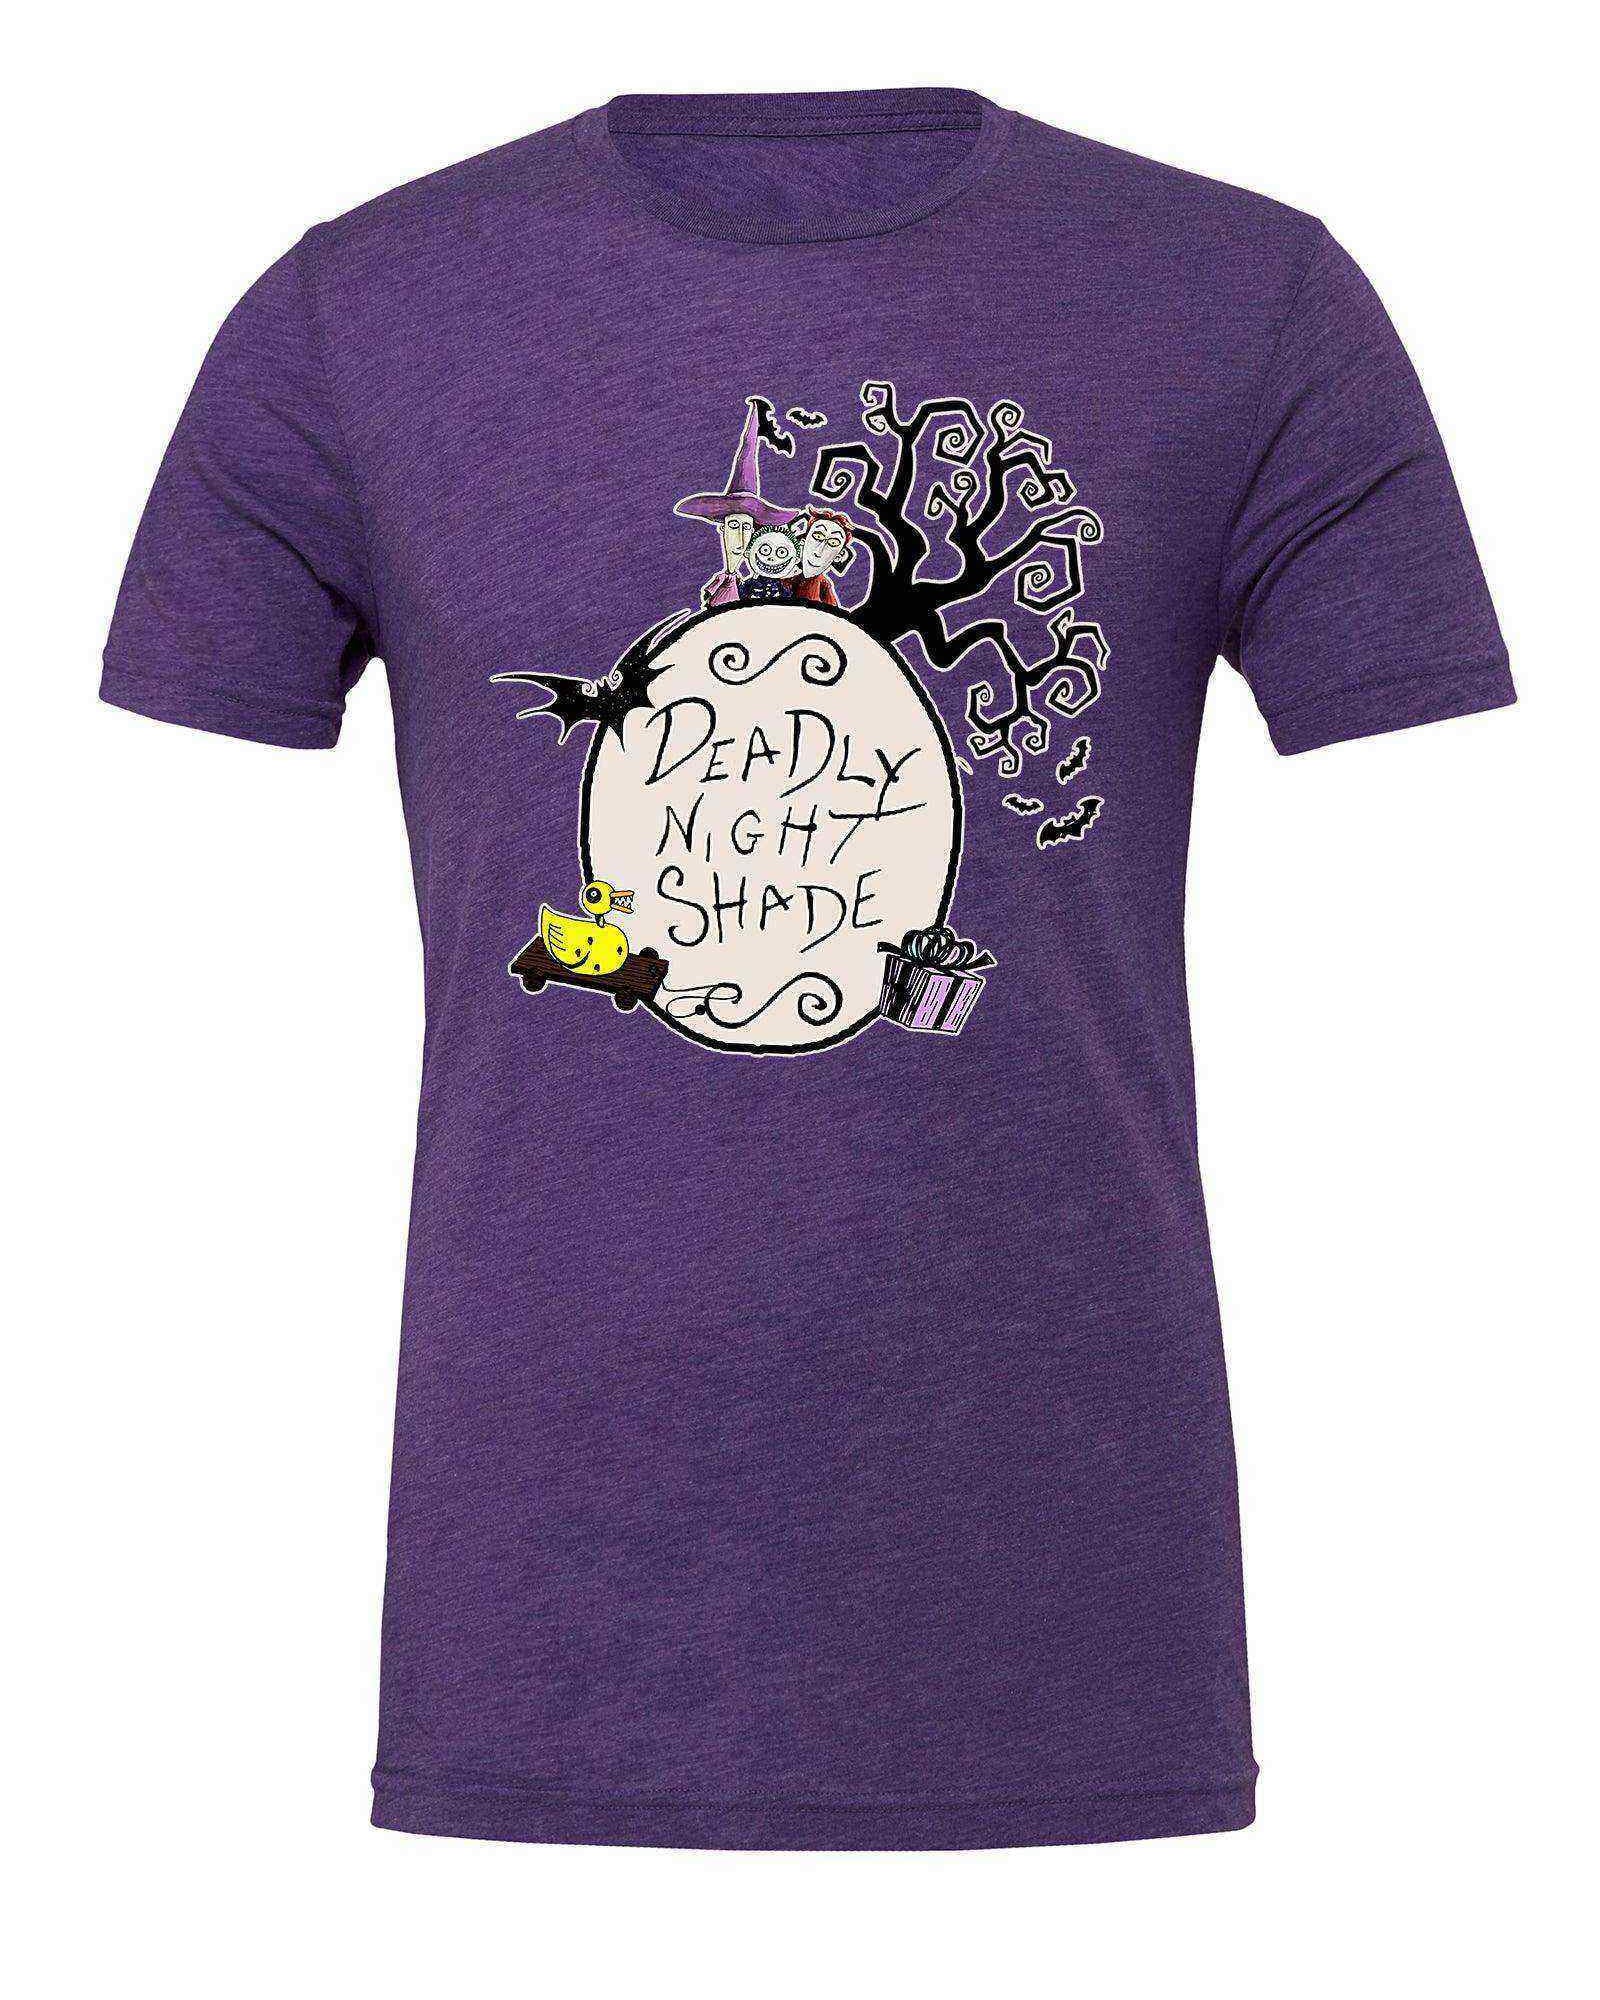 Deadly Nightshade Tattoo Shirt | Nightmare Before Christmas Tattoo | Boogie Boys - Dylan's Tees